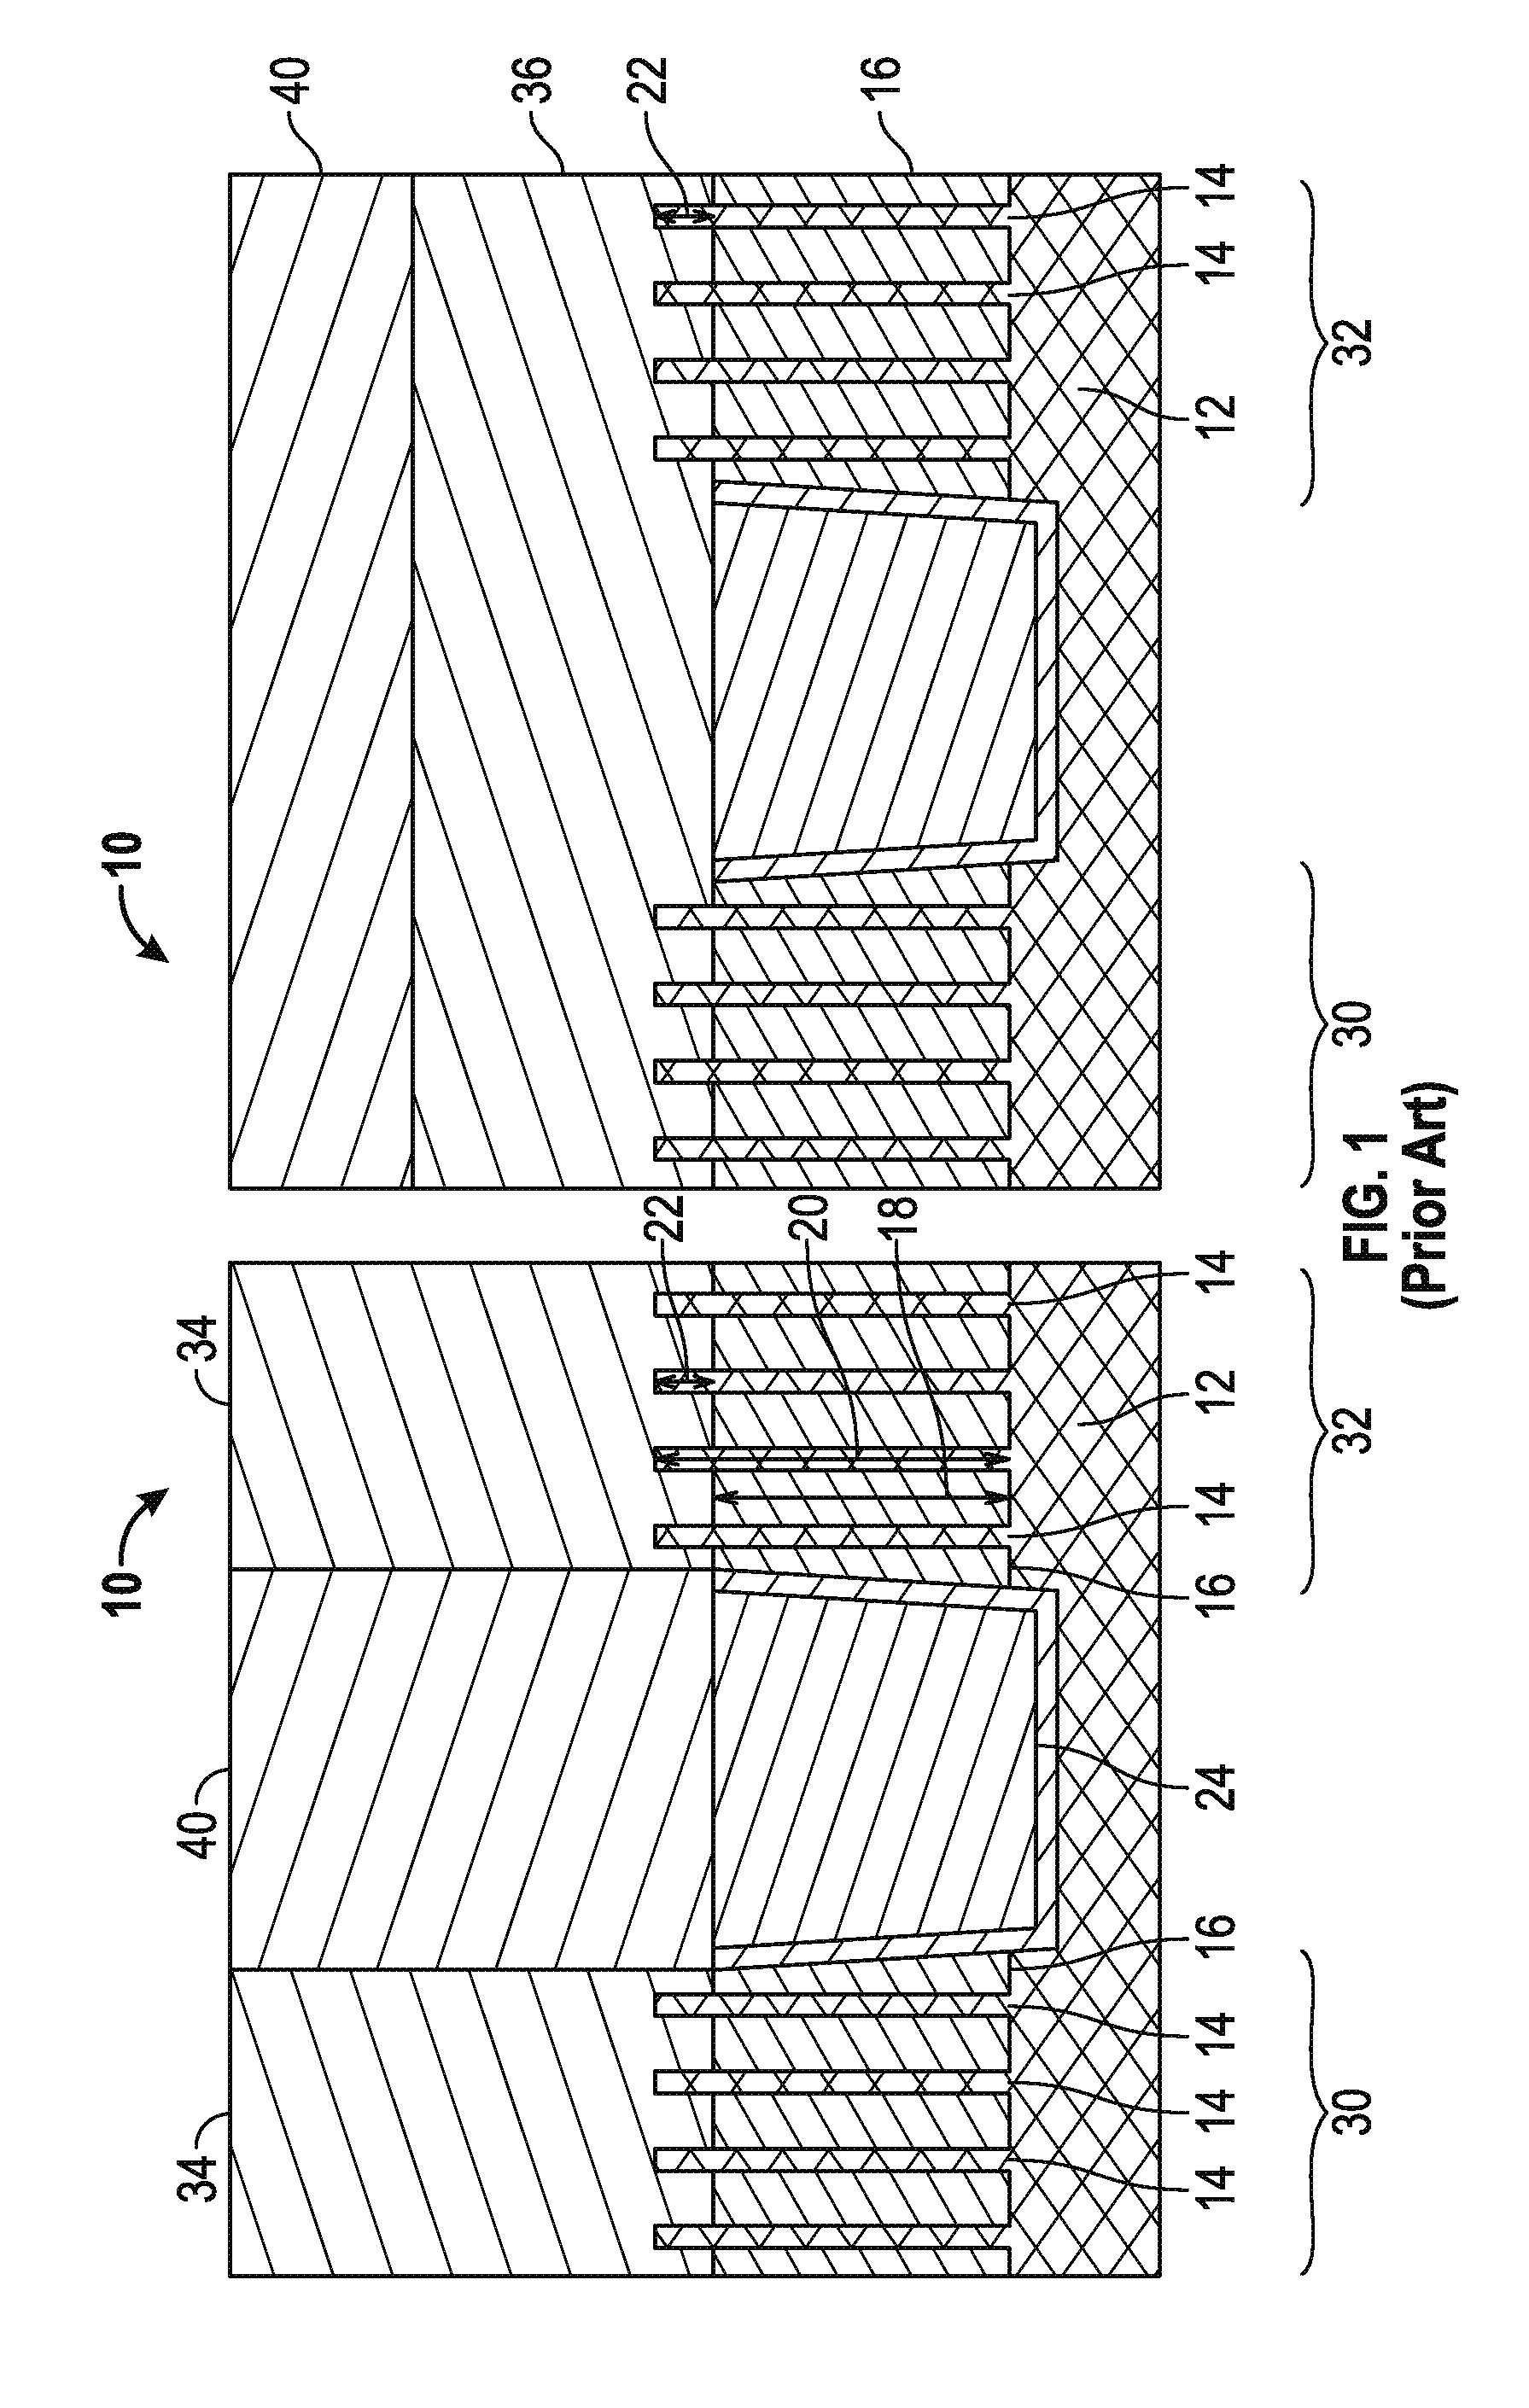 Finfet integrated circuits with uniform fin height and methods for fabricating the same